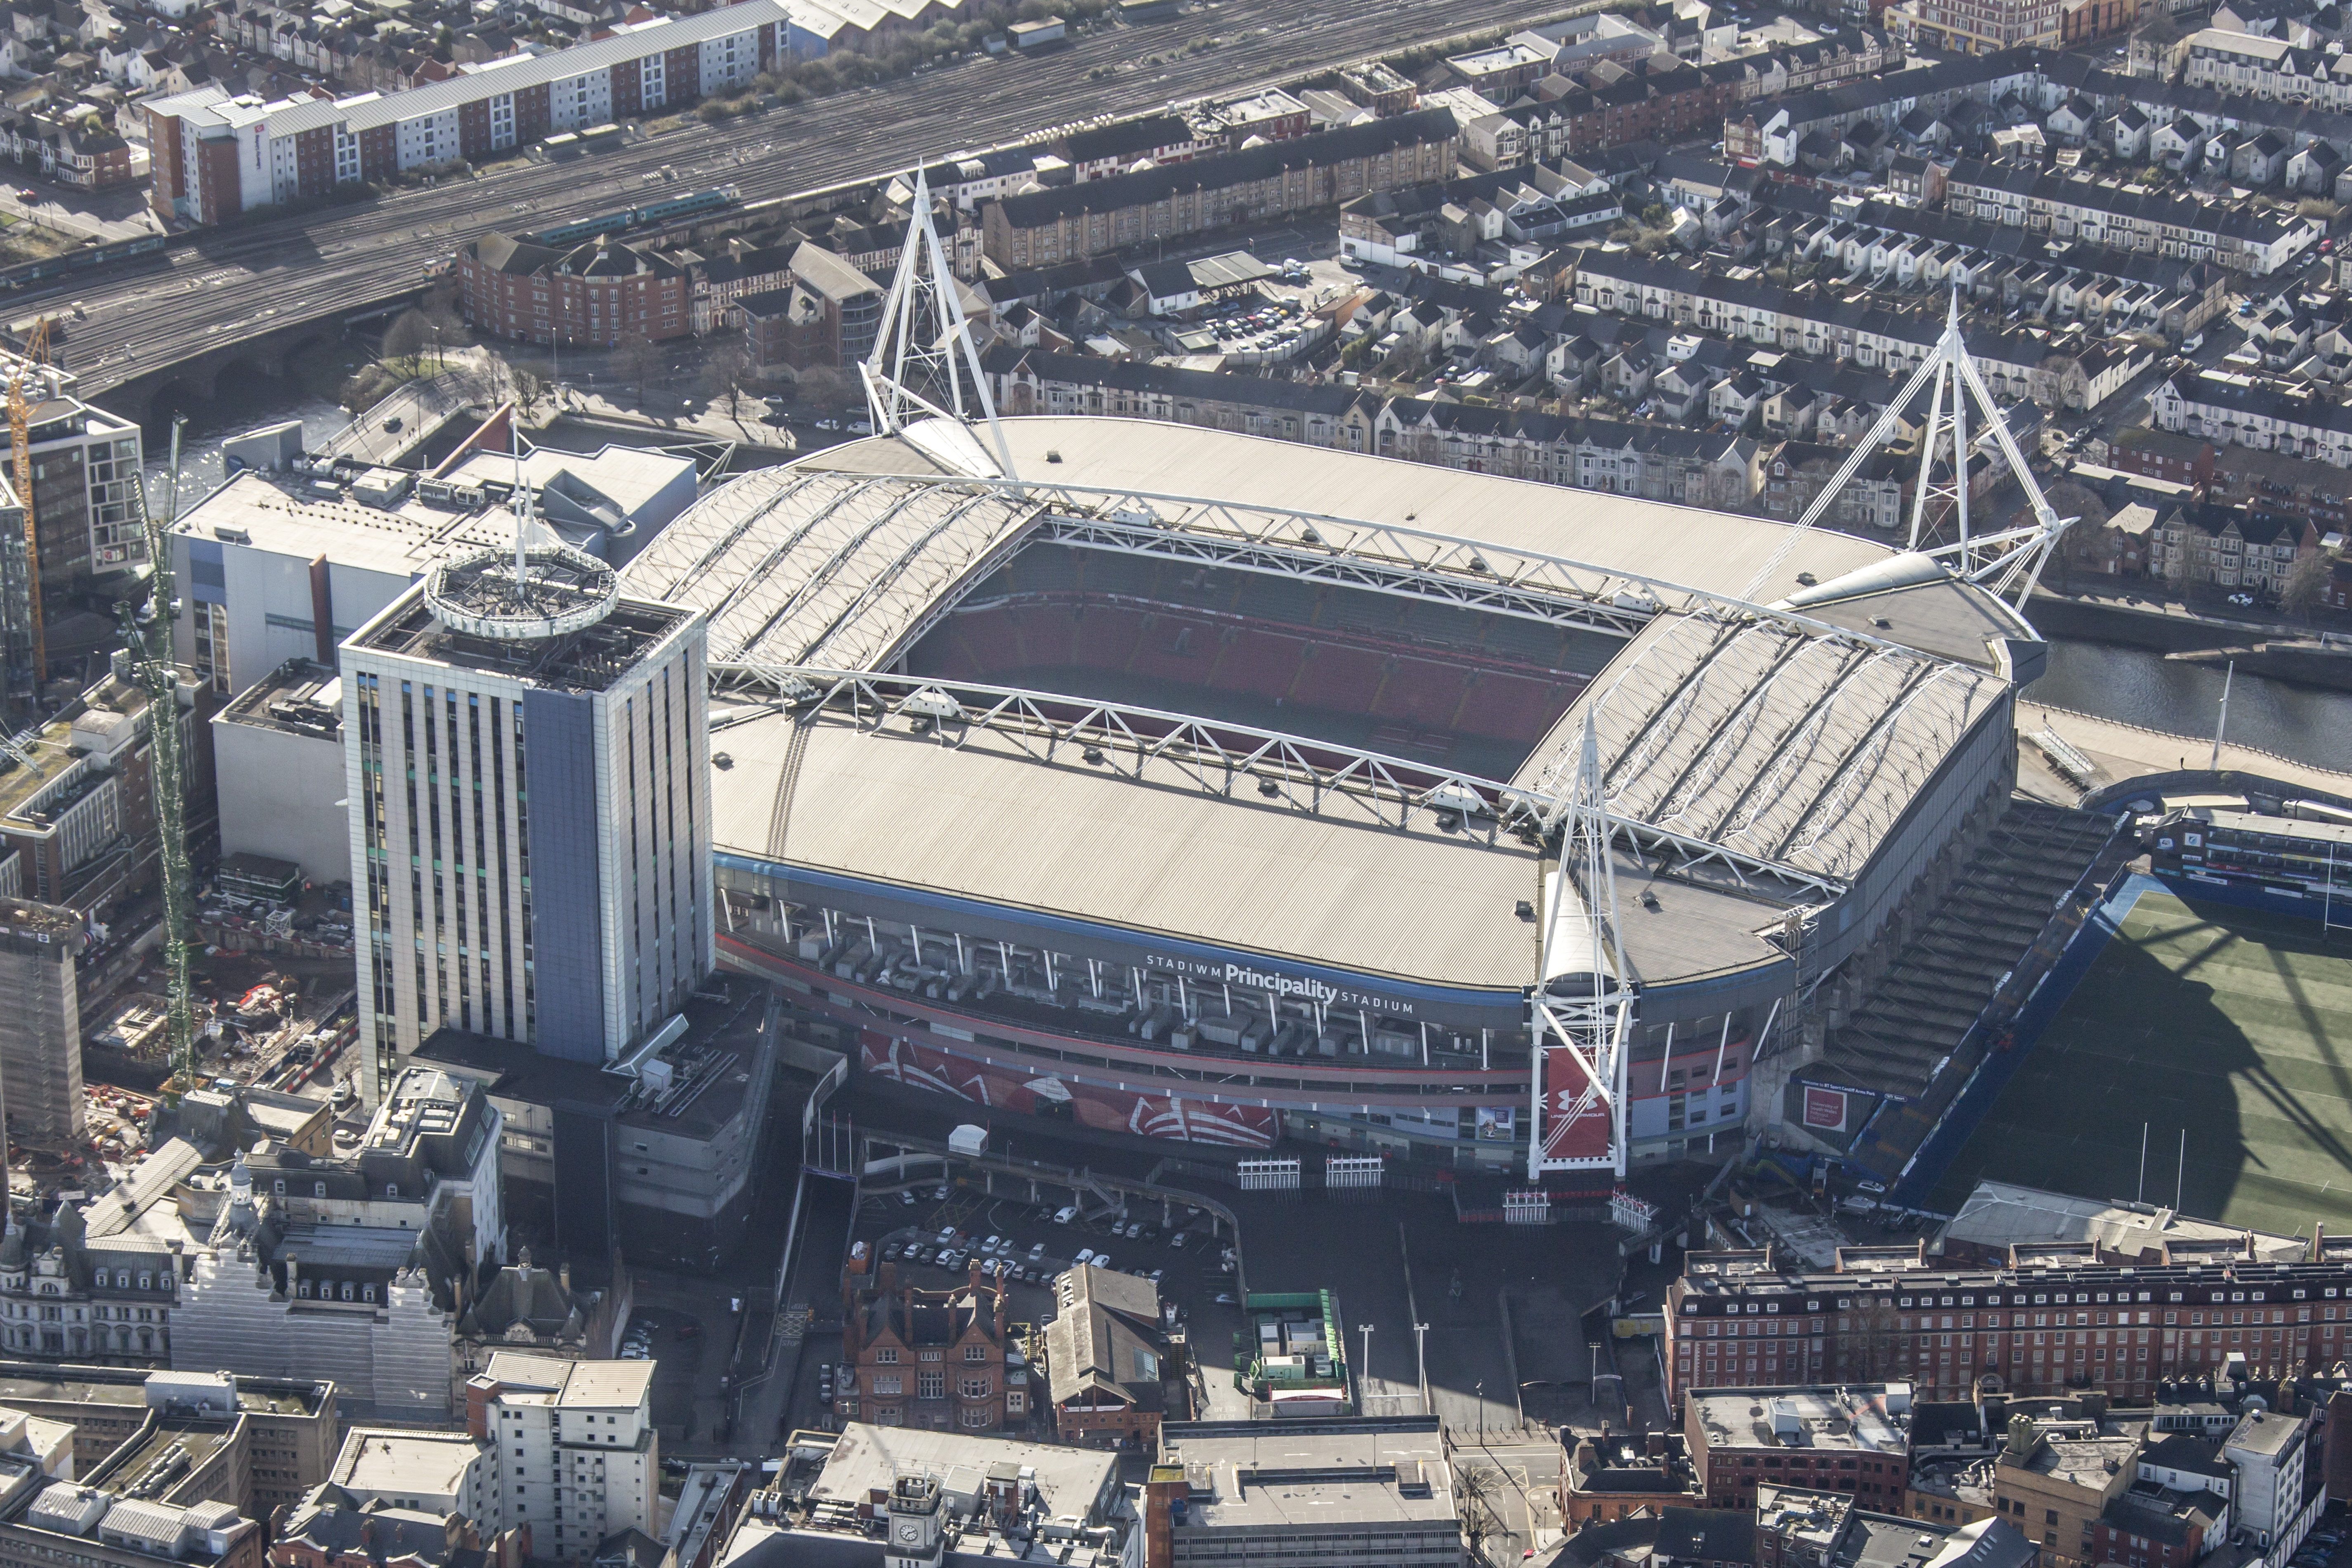 Principality Stadium in Cardiff is said to be the second most dangerous UK stadium where Swift will perform this summer